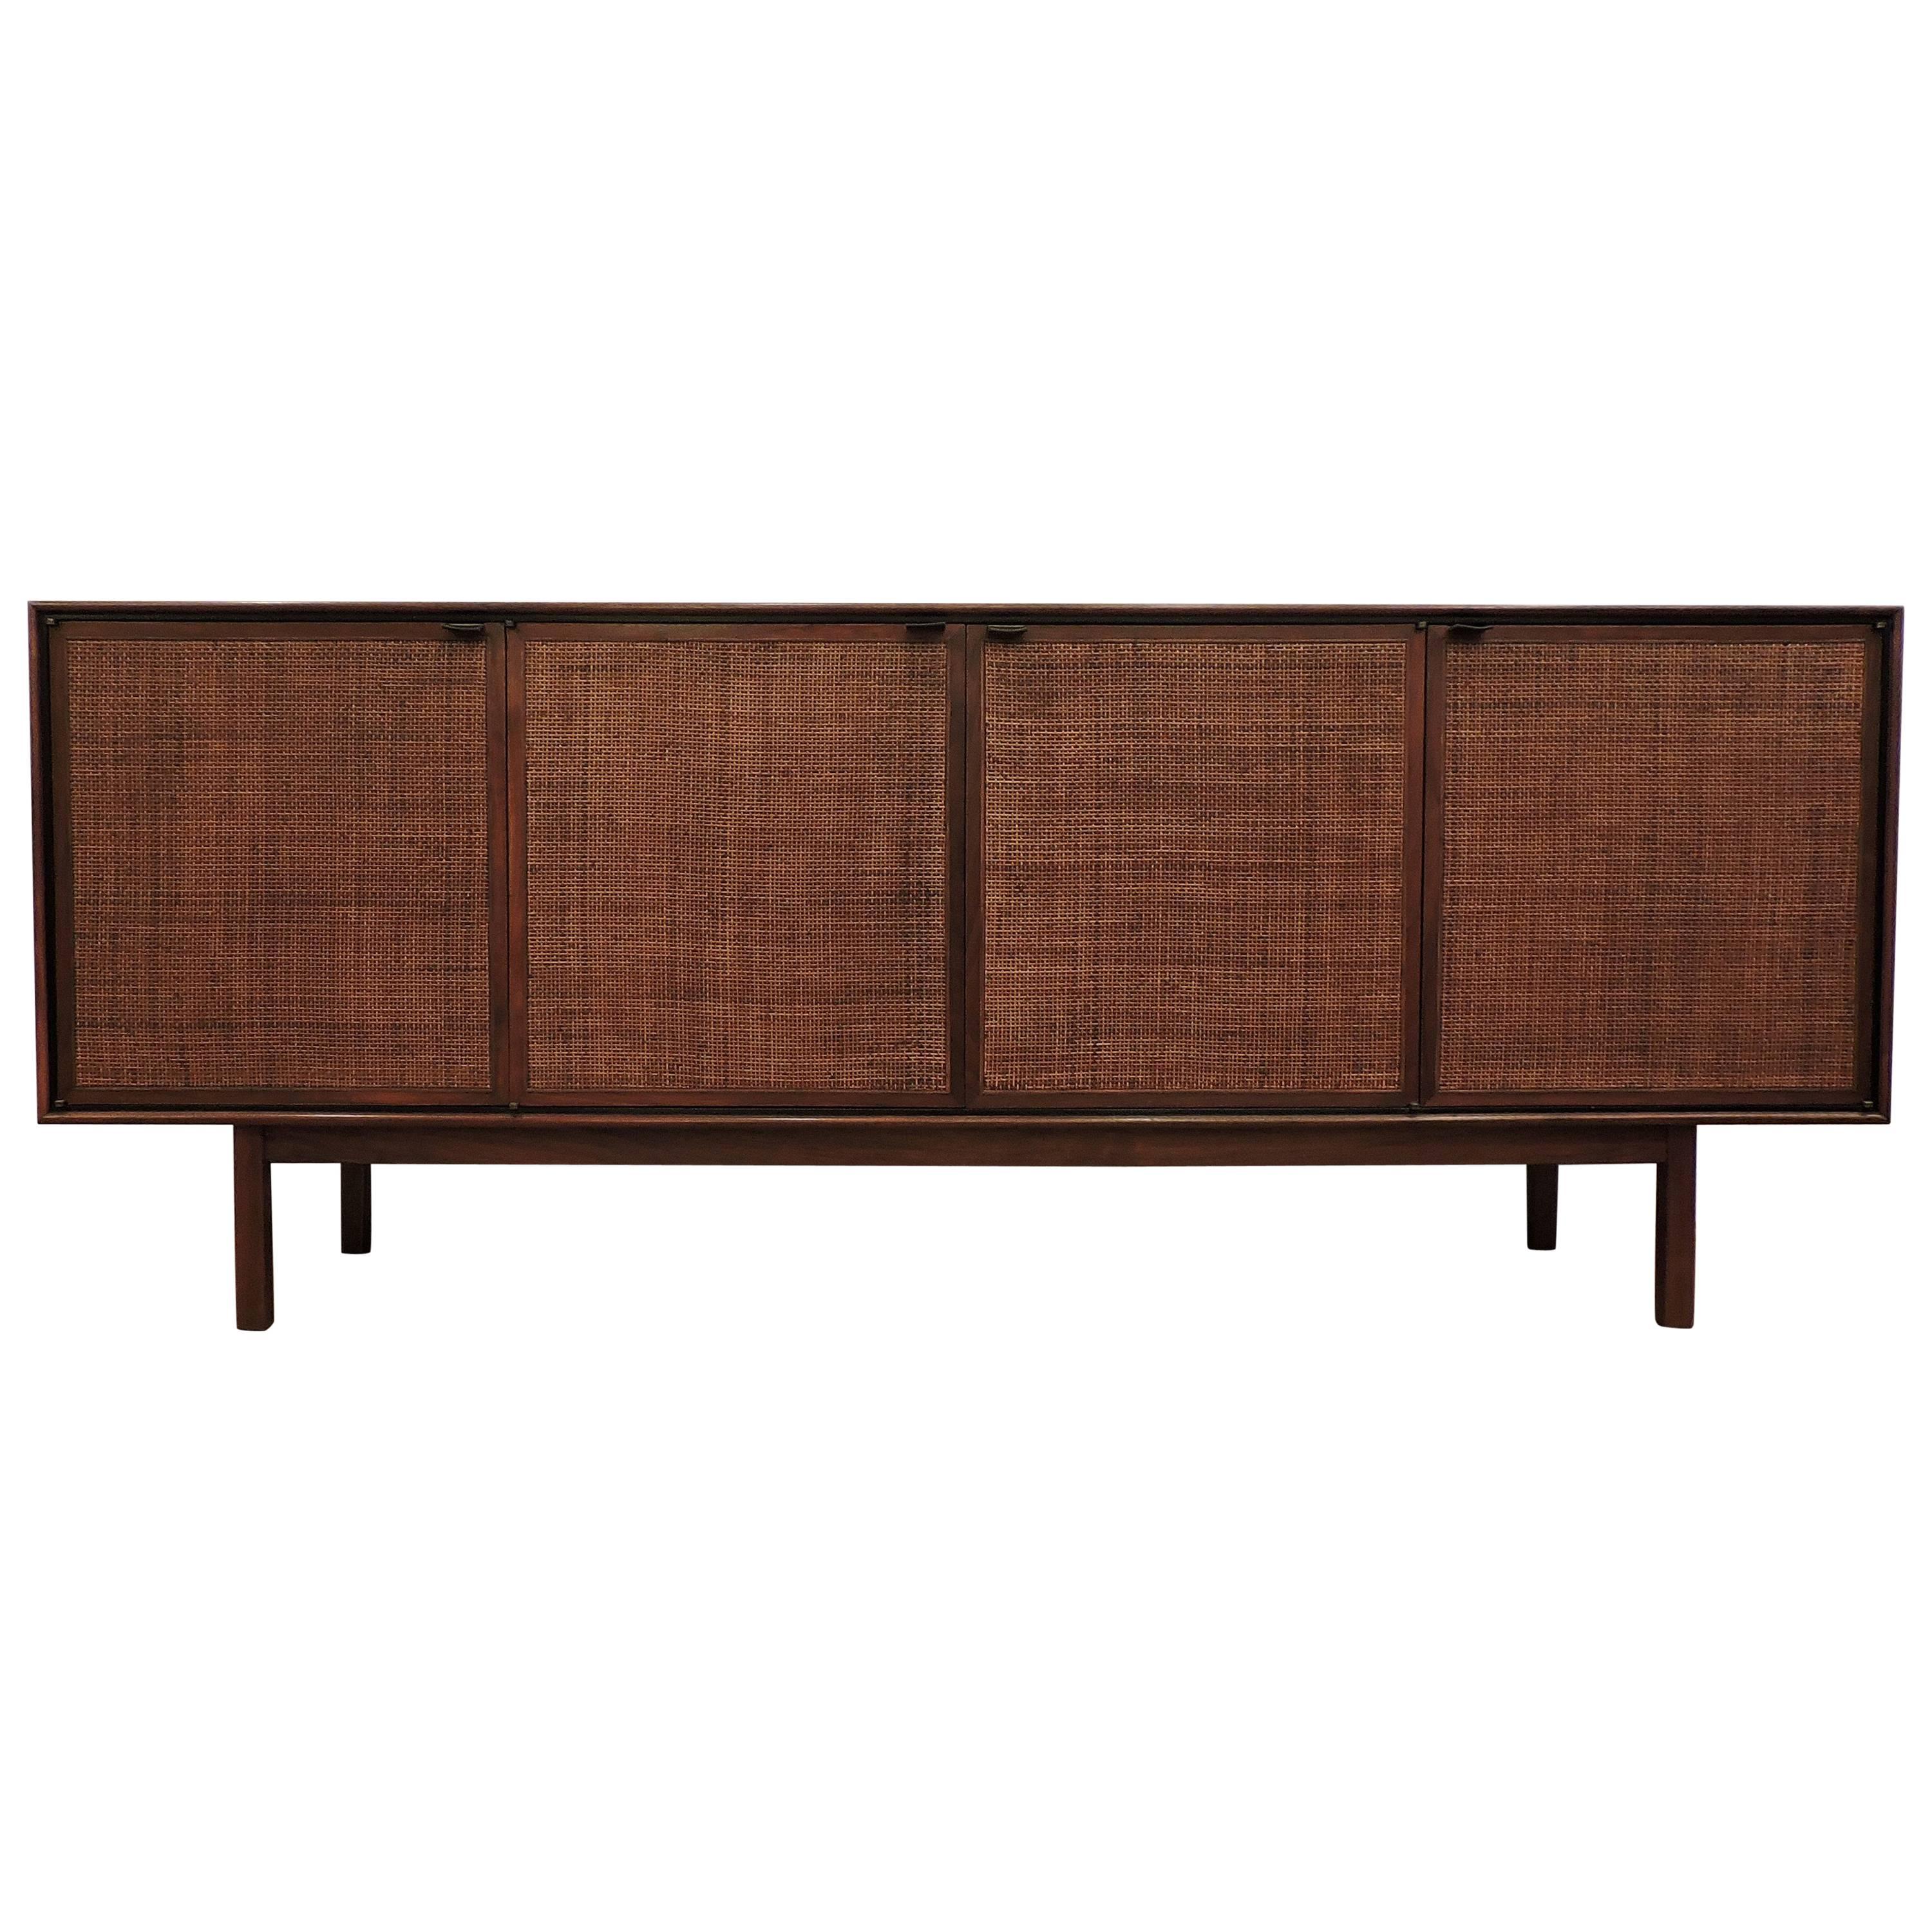 Florence Knoll Mid-Century Modern Walnut and Cane Credenza